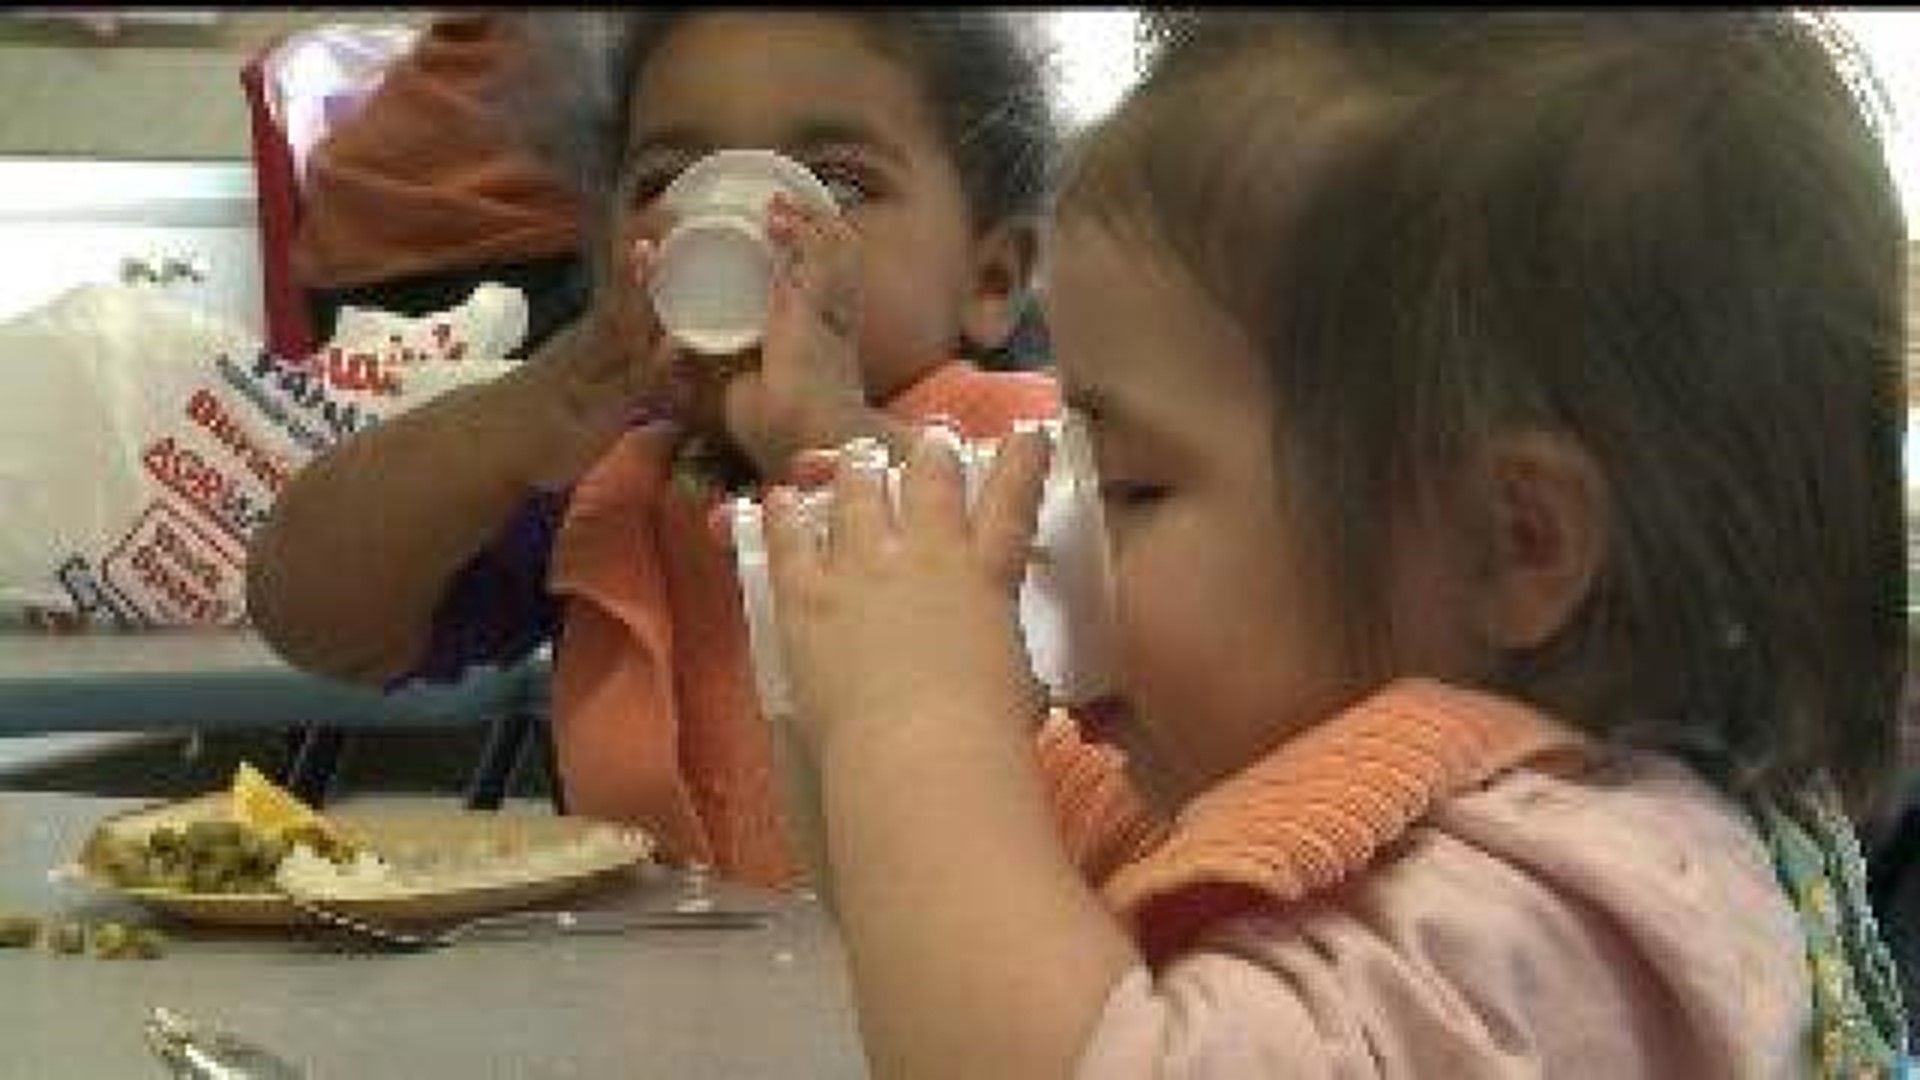 Local child care working toward a healthier tomorrow